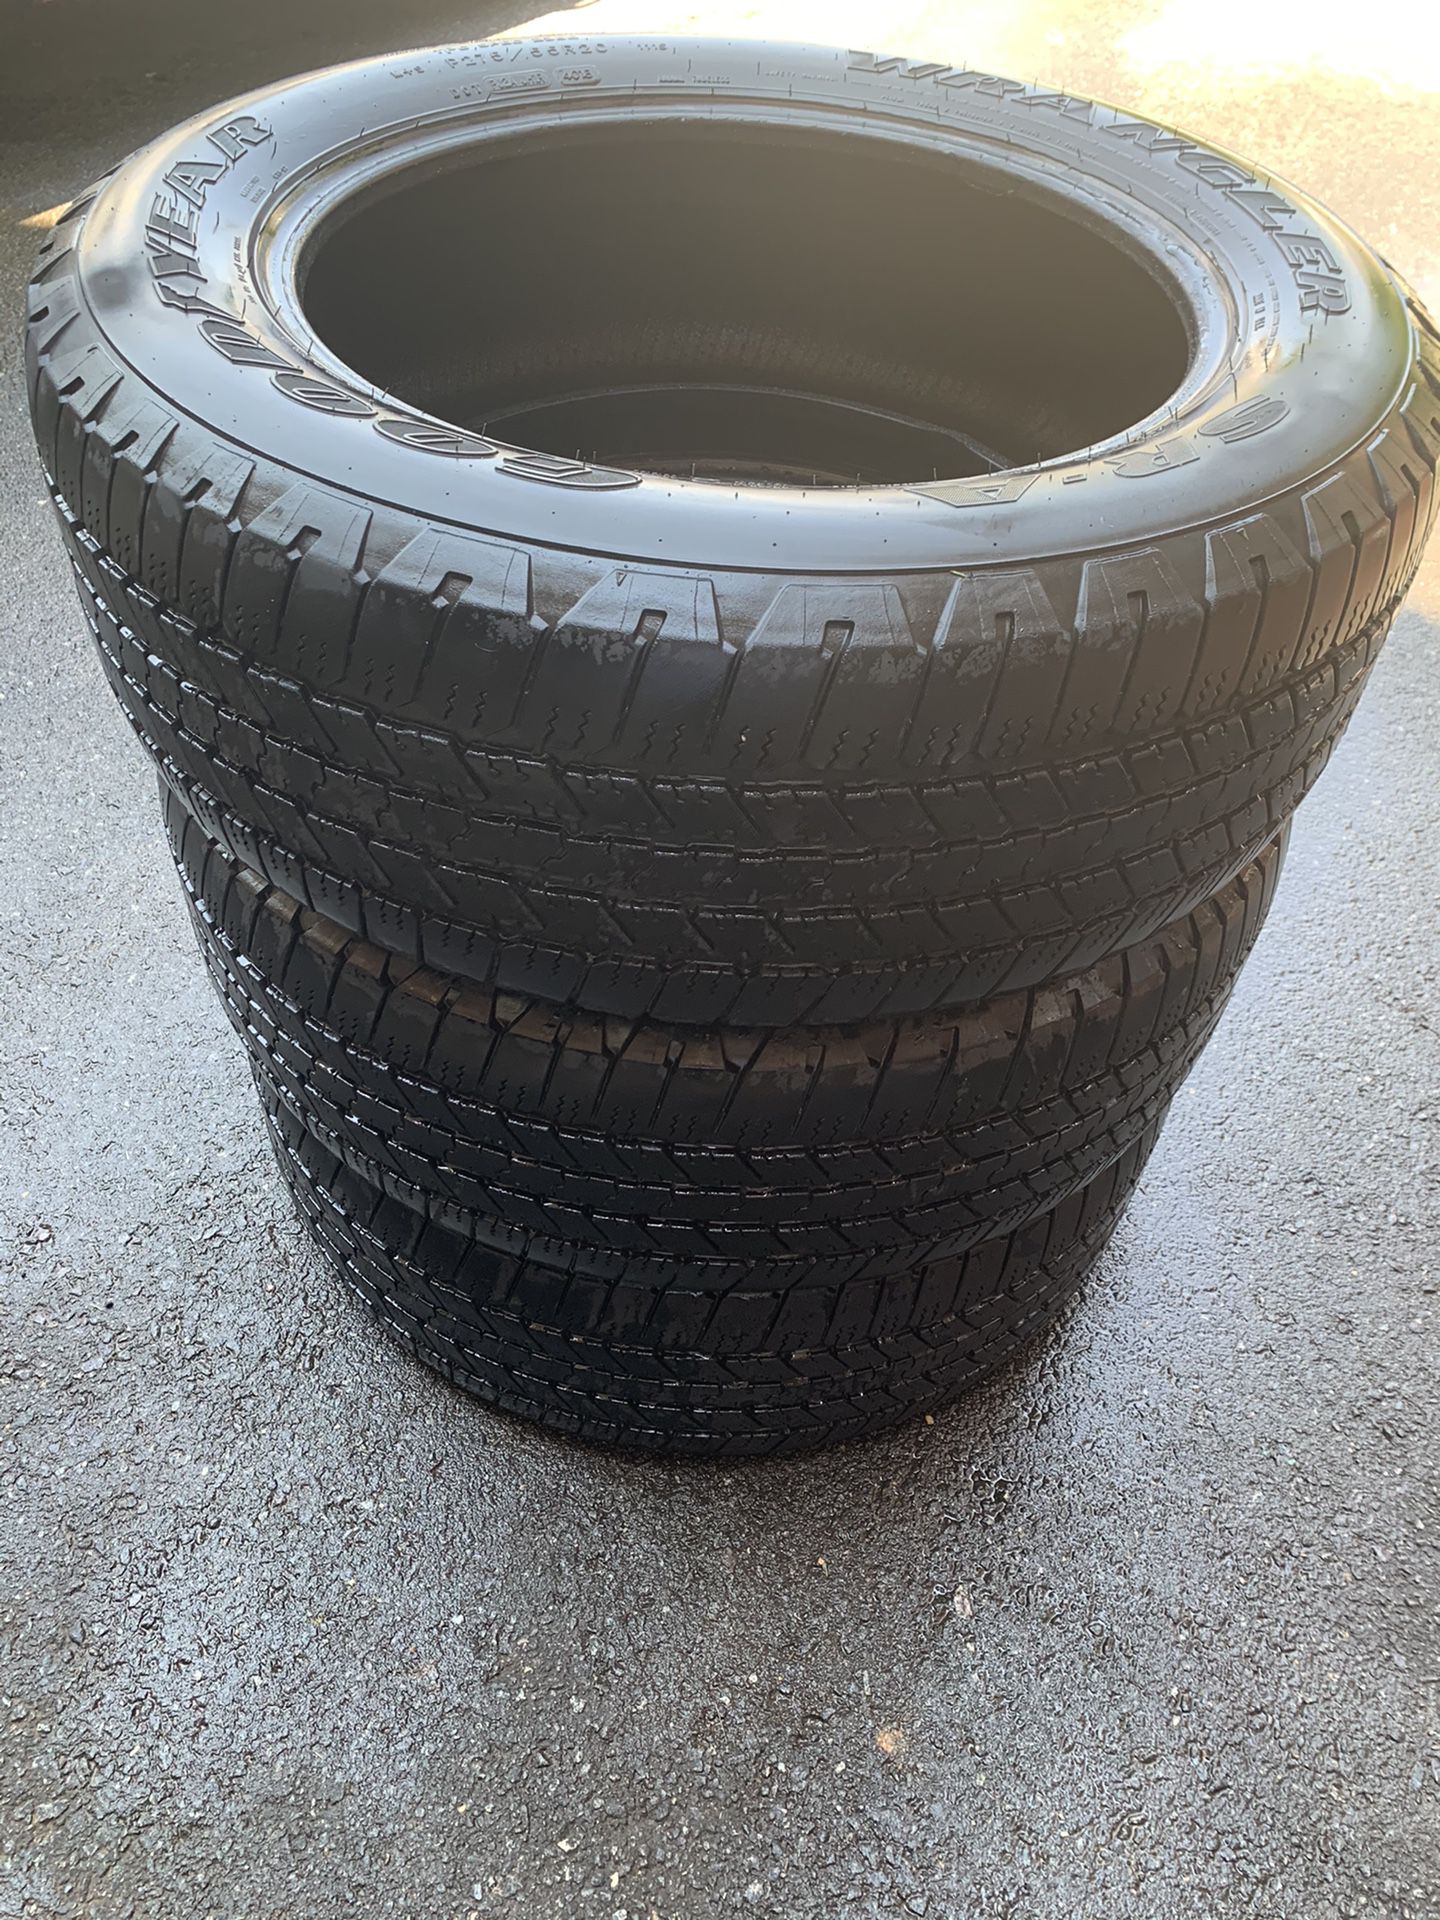 USED GOODYEAR 275/55R20 TIRES